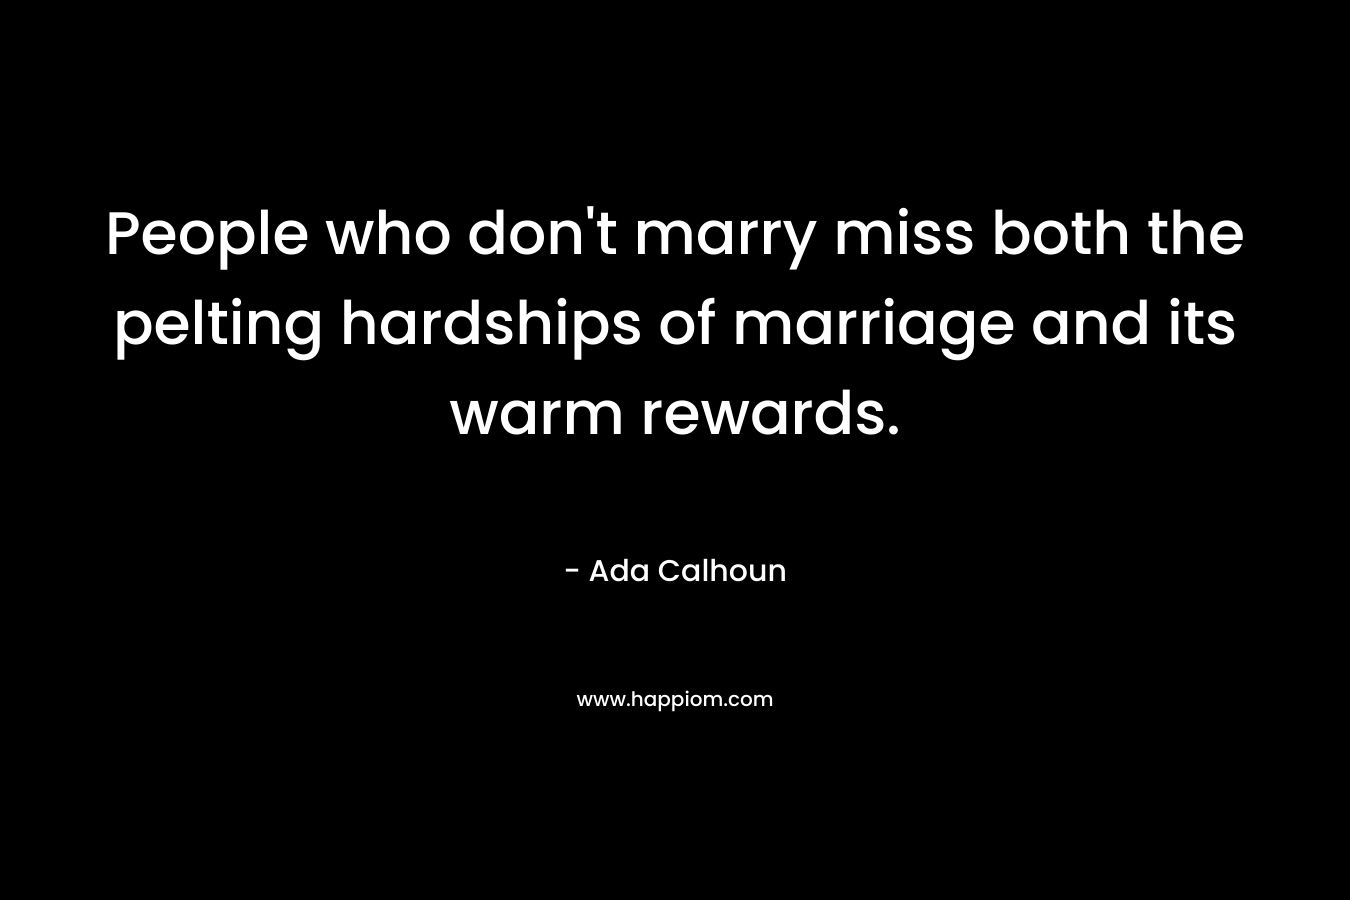 People who don't marry miss both the pelting hardships of marriage and its warm rewards.